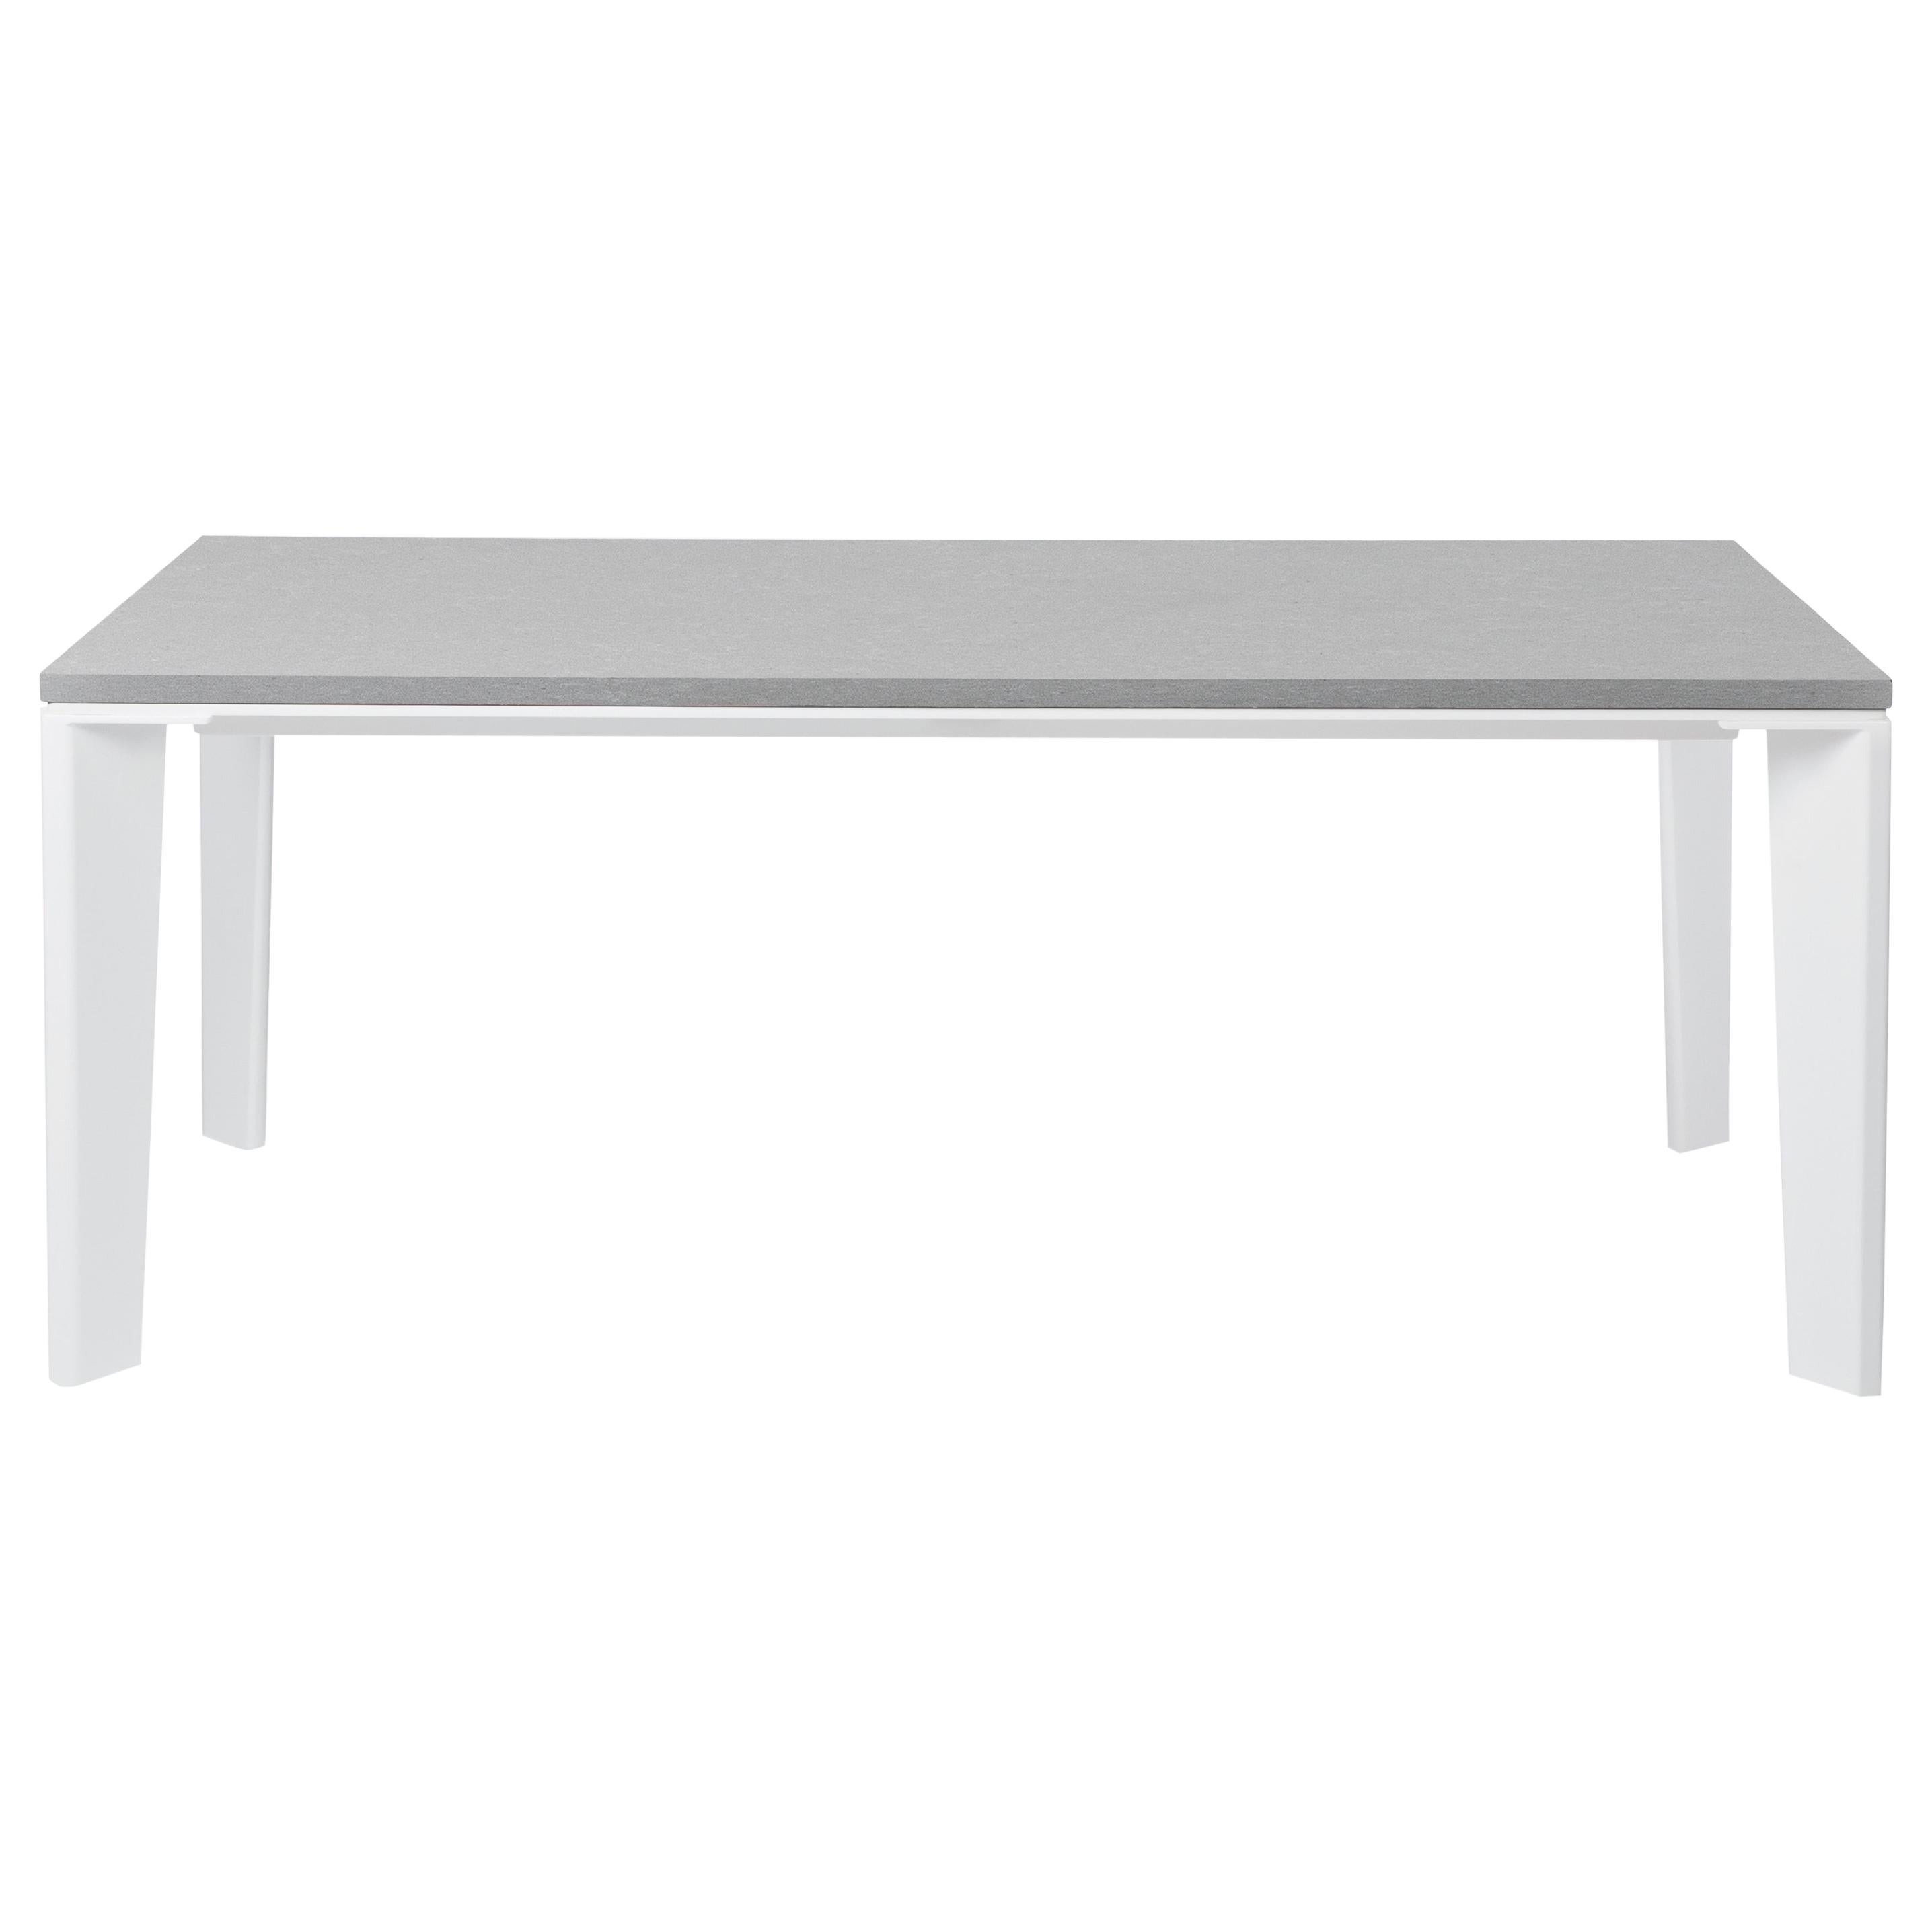 HOLLY HUNT Outdoor Keel 74" Dining Table in Pearl Metal & Belgium Fog Stone Top For Sale